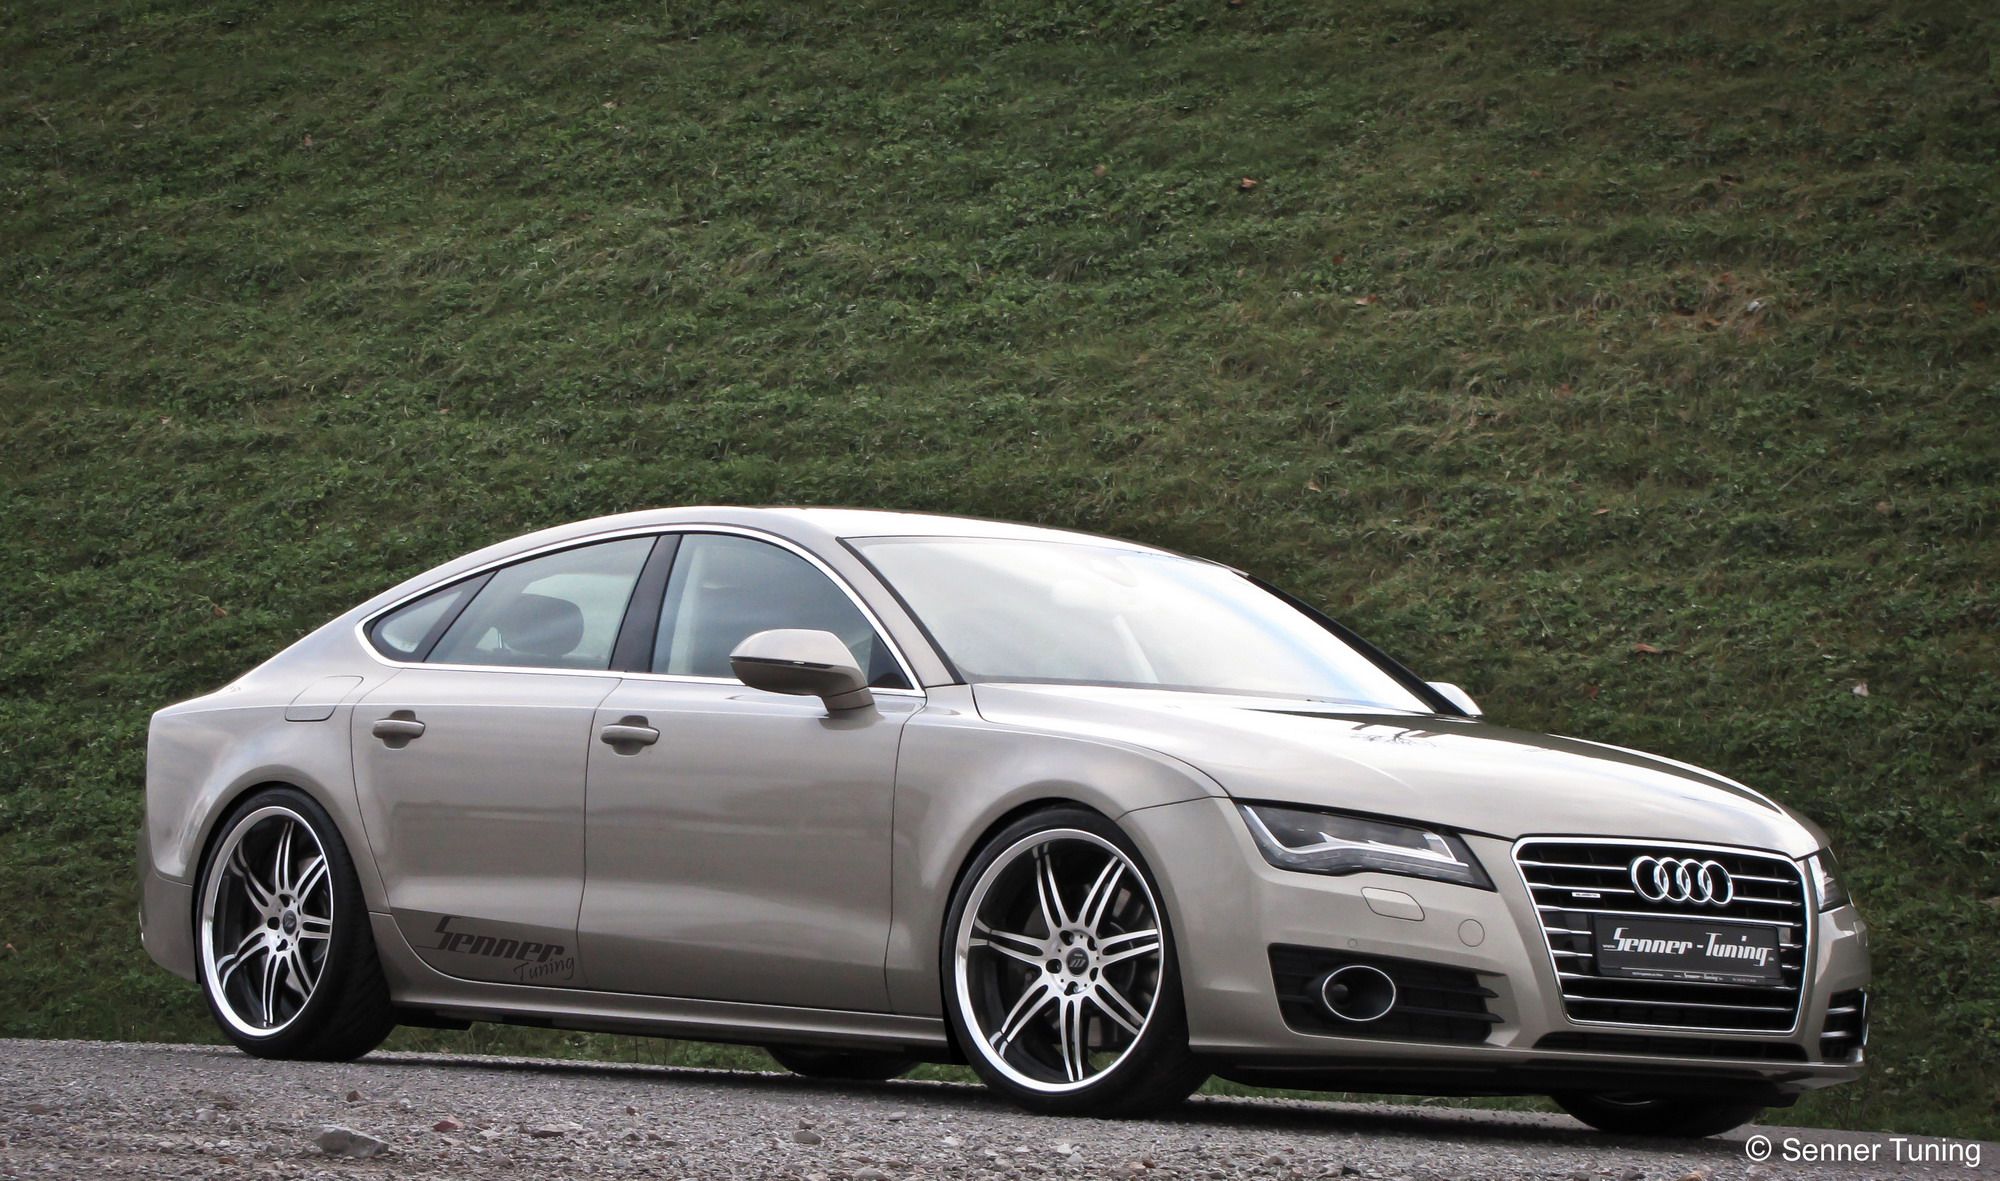 2011 Audi A7 by Senner Tuning